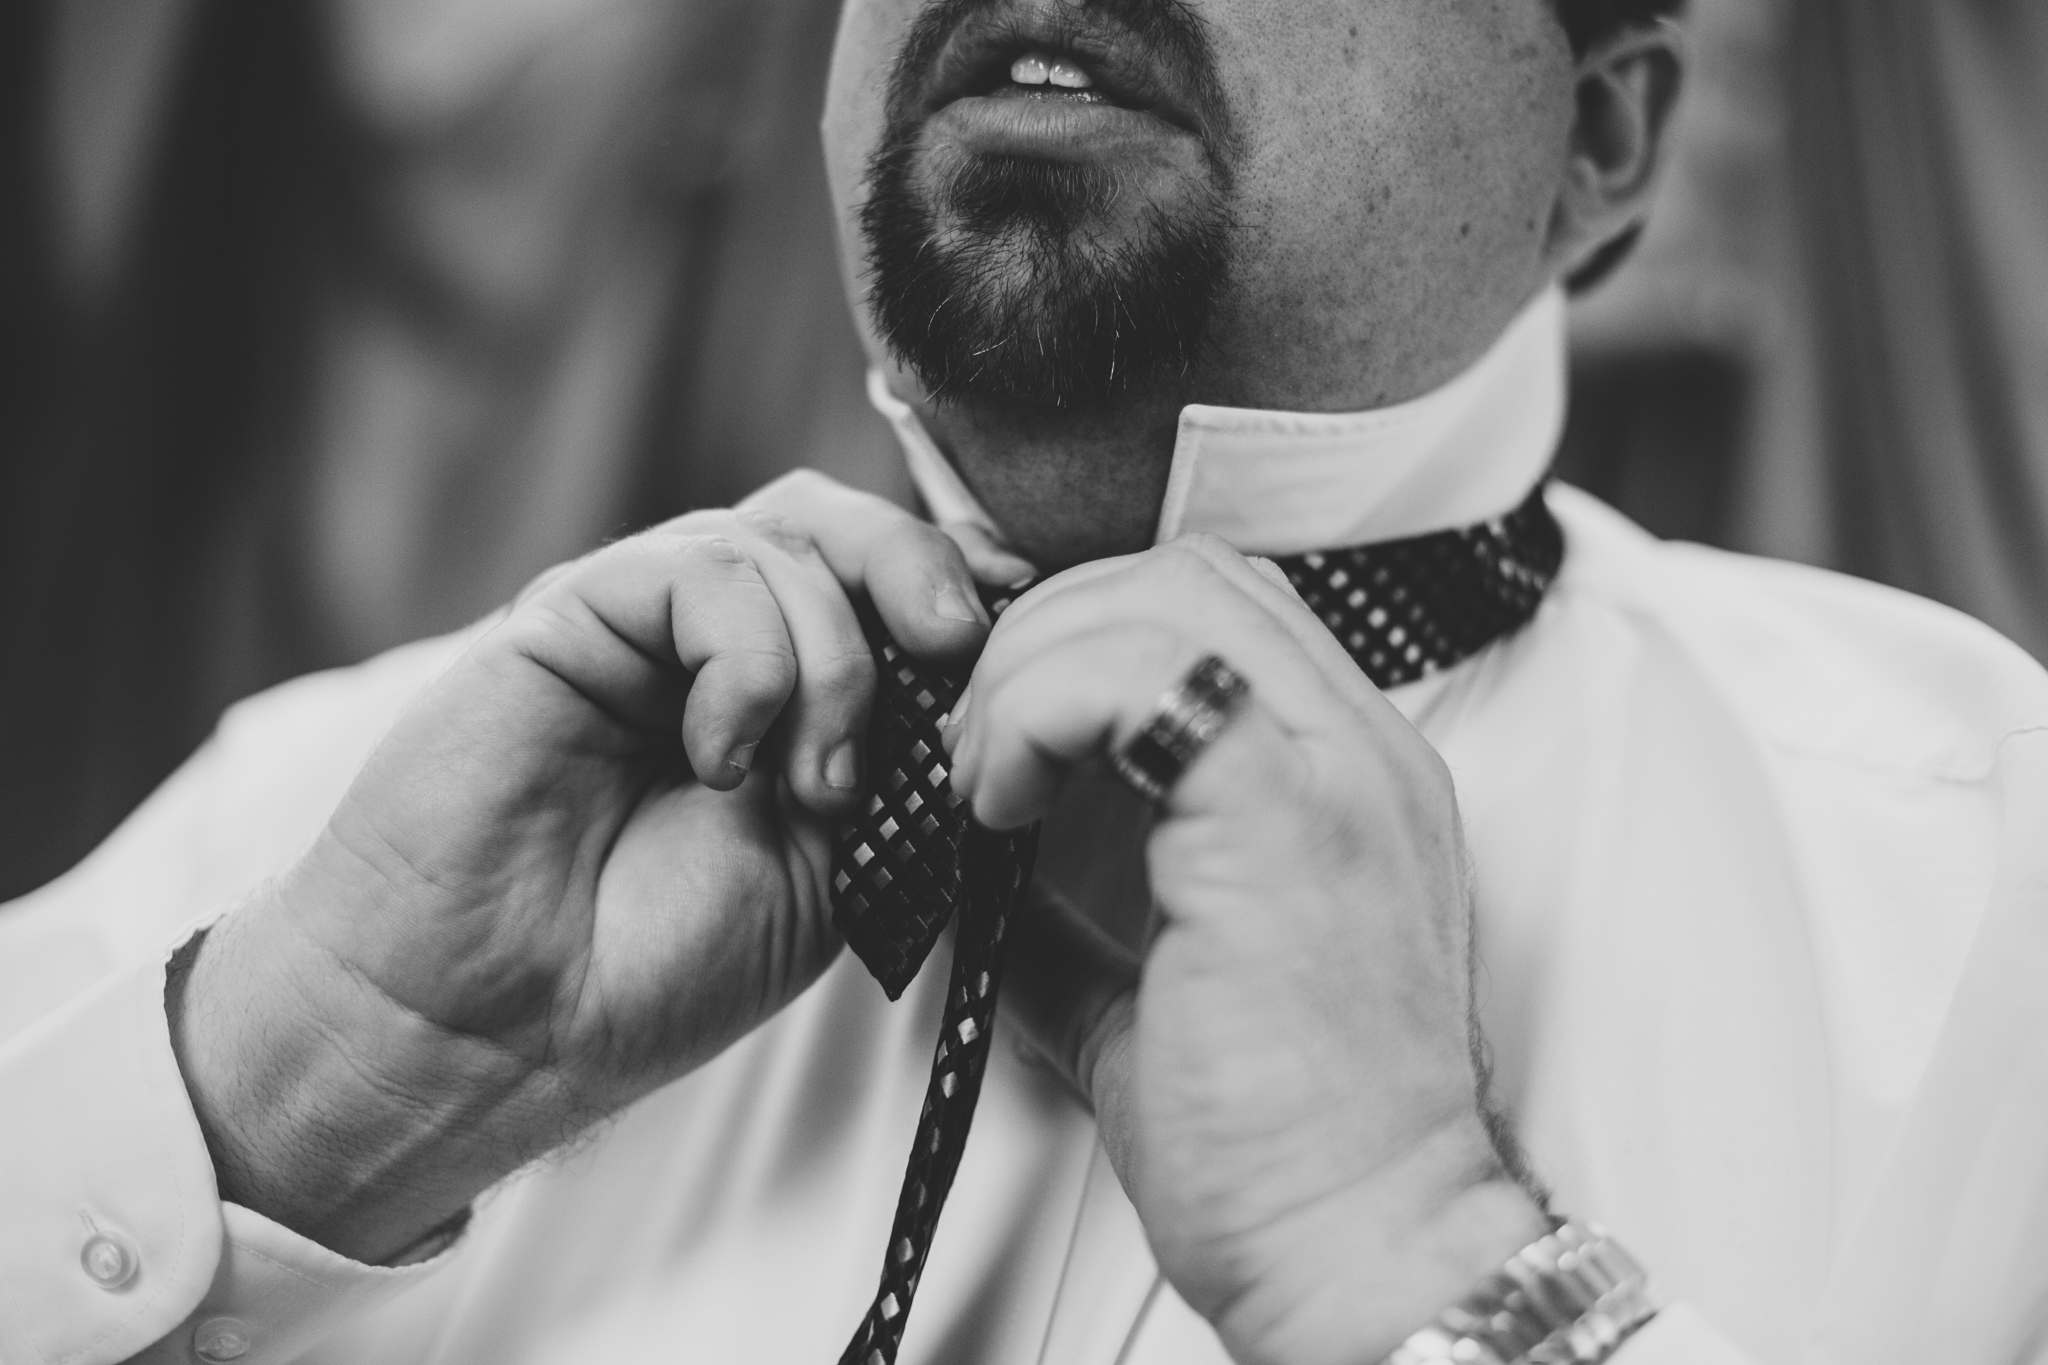 rs groom puts his tie on getting ready bw